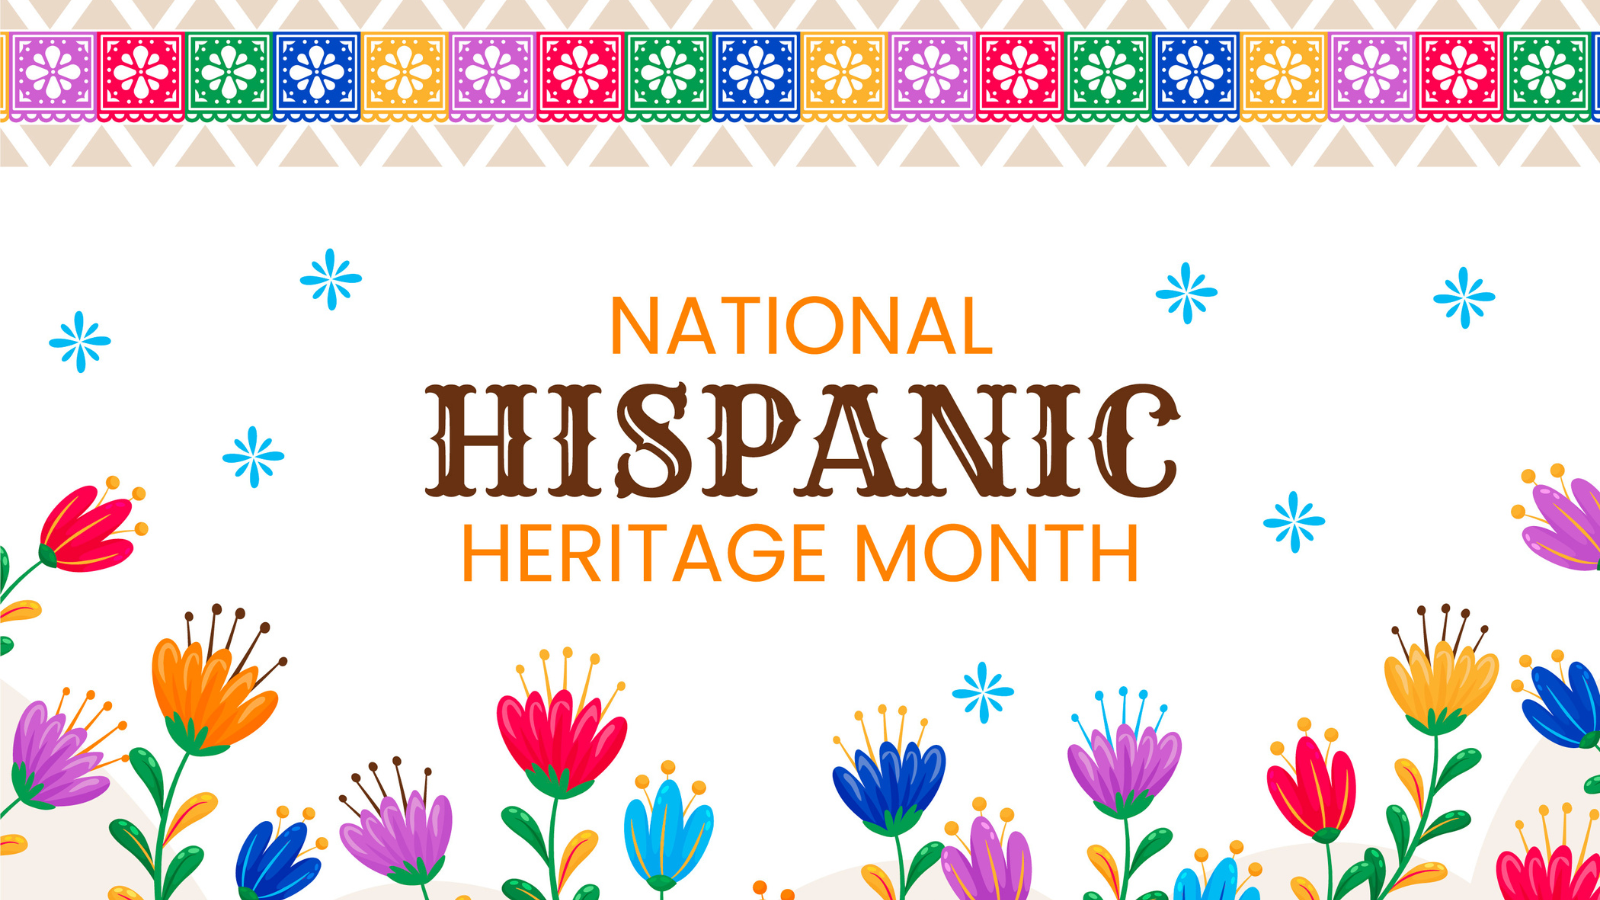 National Hispanic Heritage Month with banner of flags at top and flowers along the bottom